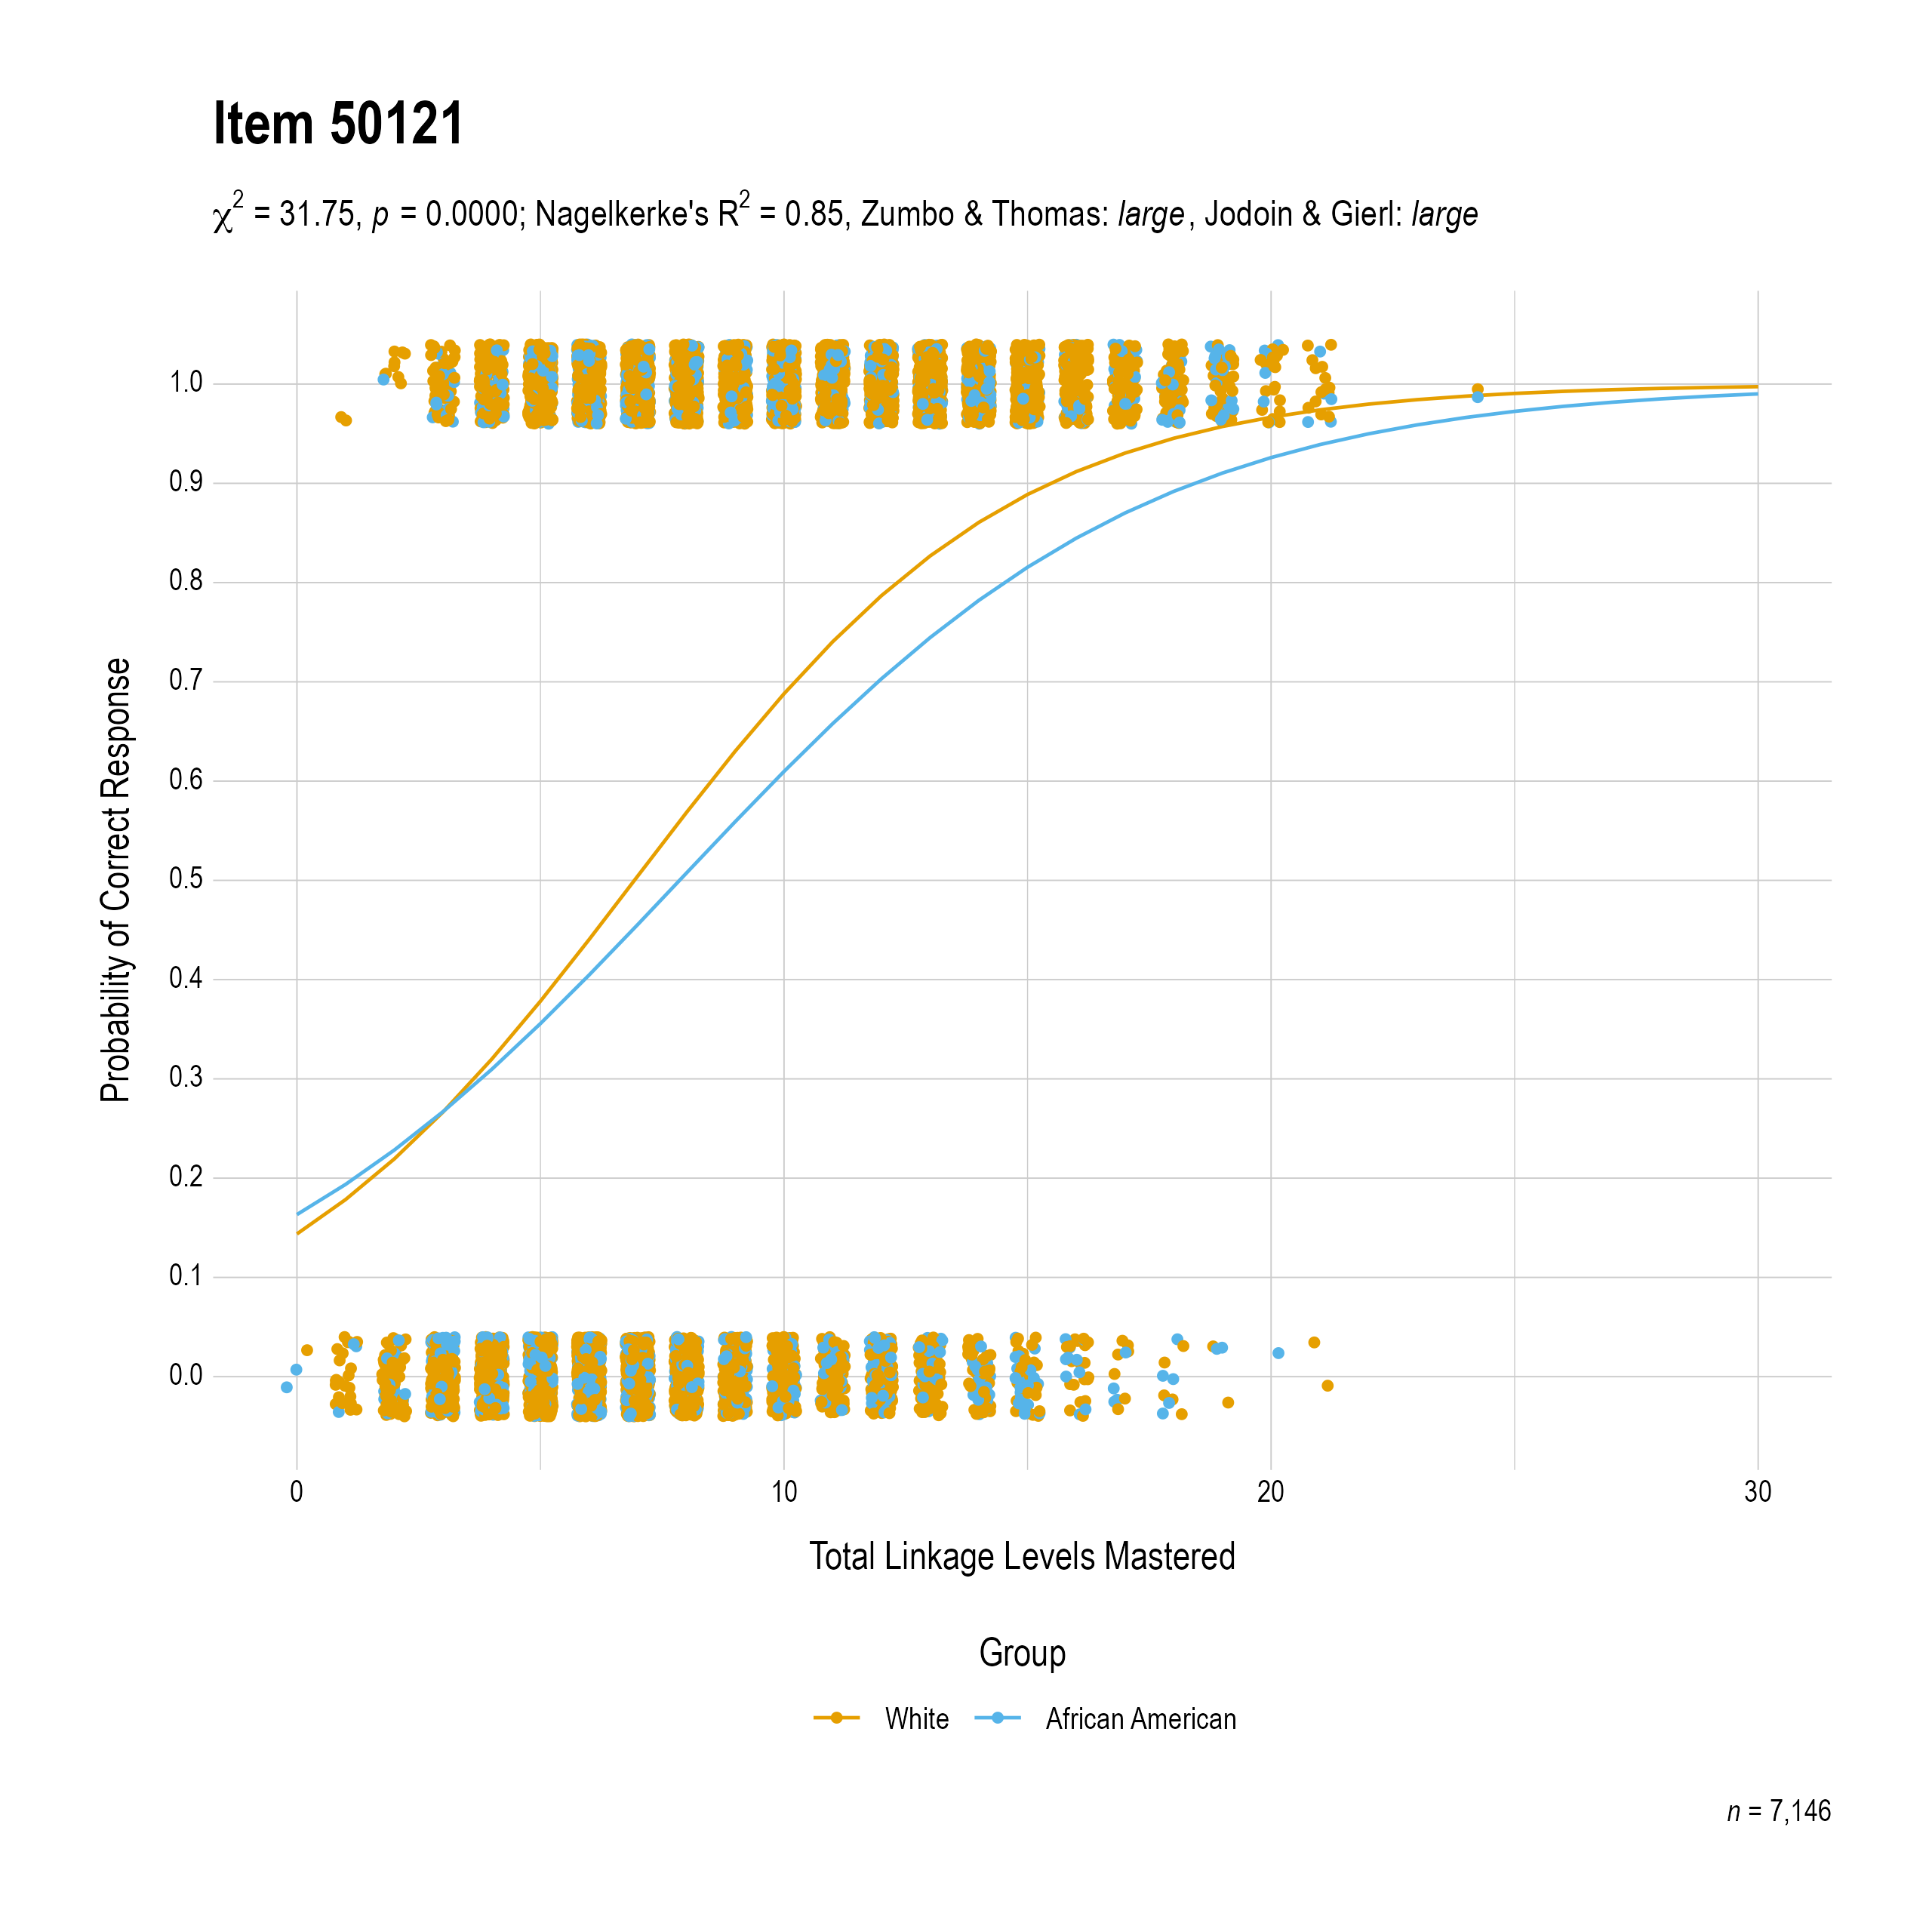 The plot of the combined race differential item function evidence for Science item 50121. The figure contains points shaded by group. The figure also contains a logistic regression curve for each group. The total linkage levels mastered in is on the x-axis, and the probability of a correct response is on the y-axis.